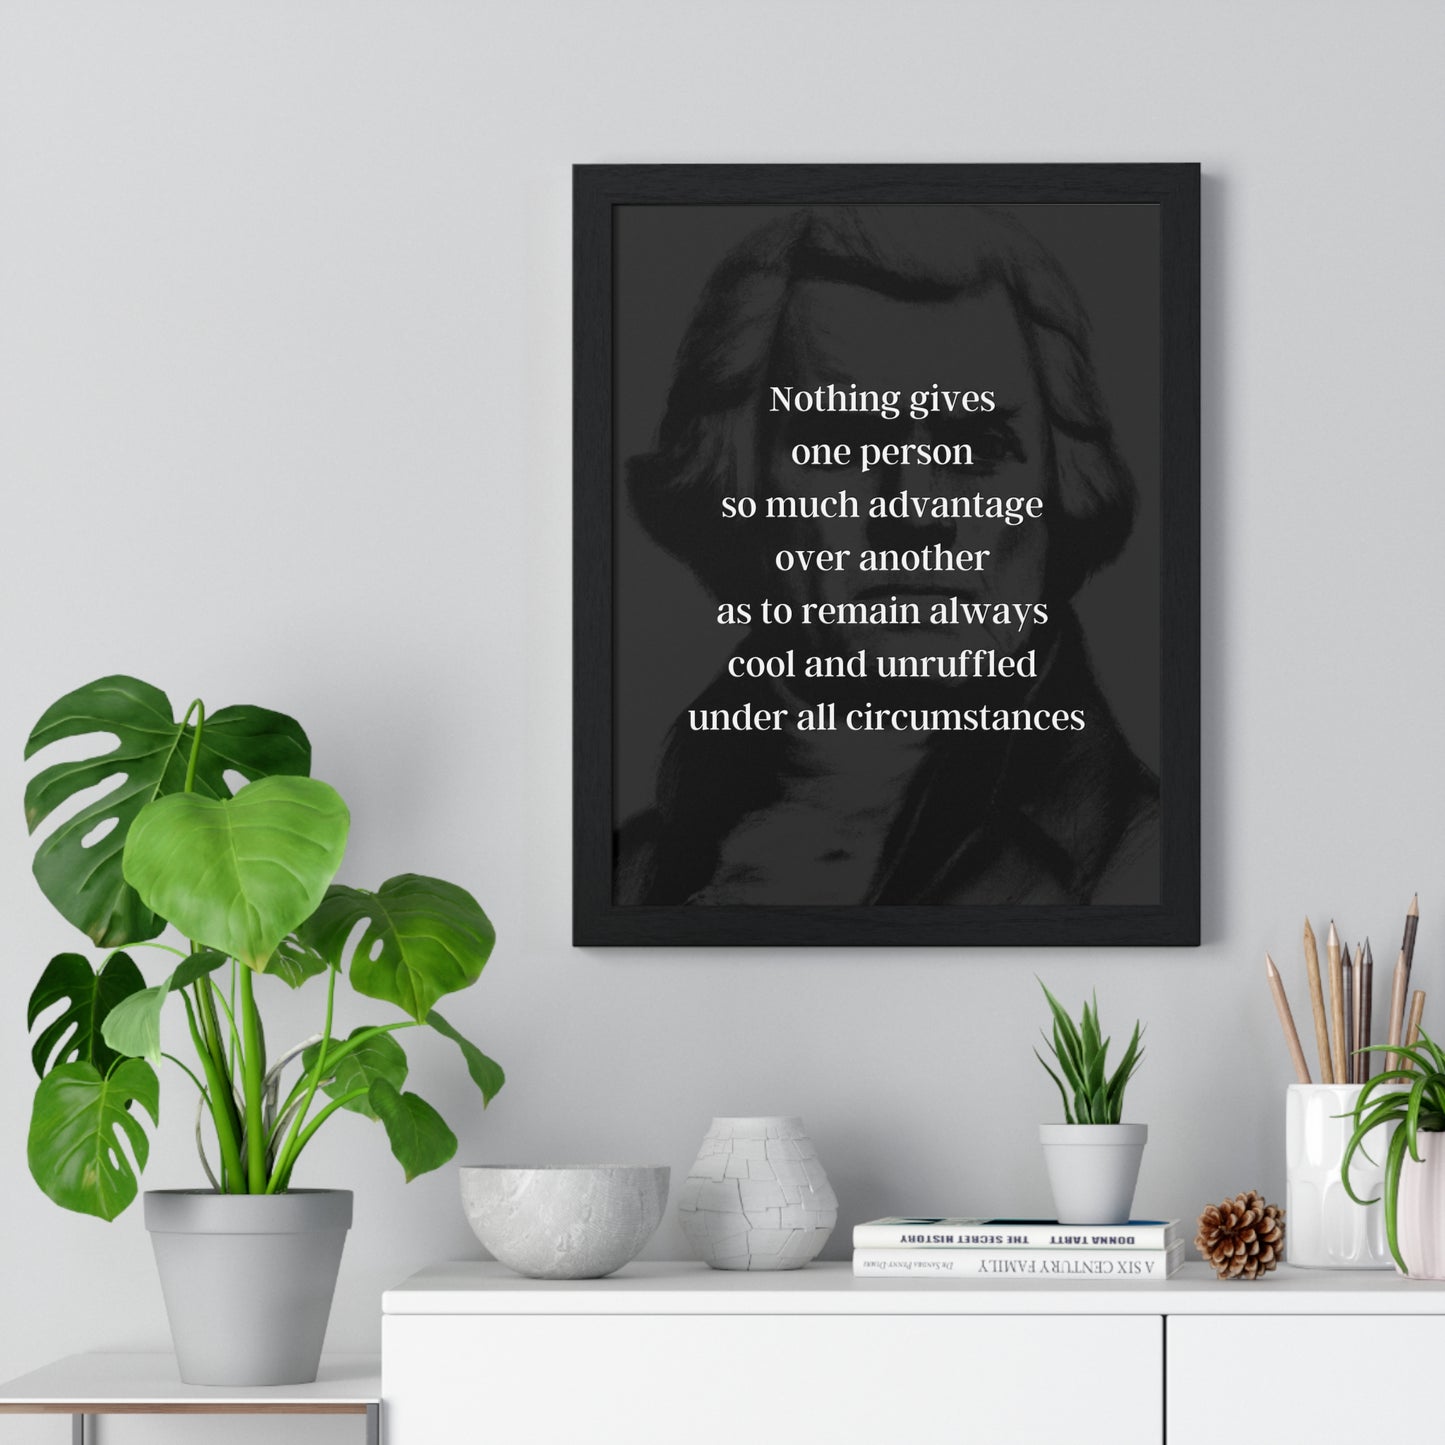 Thomas Jefferson Quote 3, Poster Art, Dark Print, 3rd President of the United States, American Patriots, AI Art, Political Art, Poster Prints, Presidential Portraits, Presidential Quotes, Inspirational Quotes